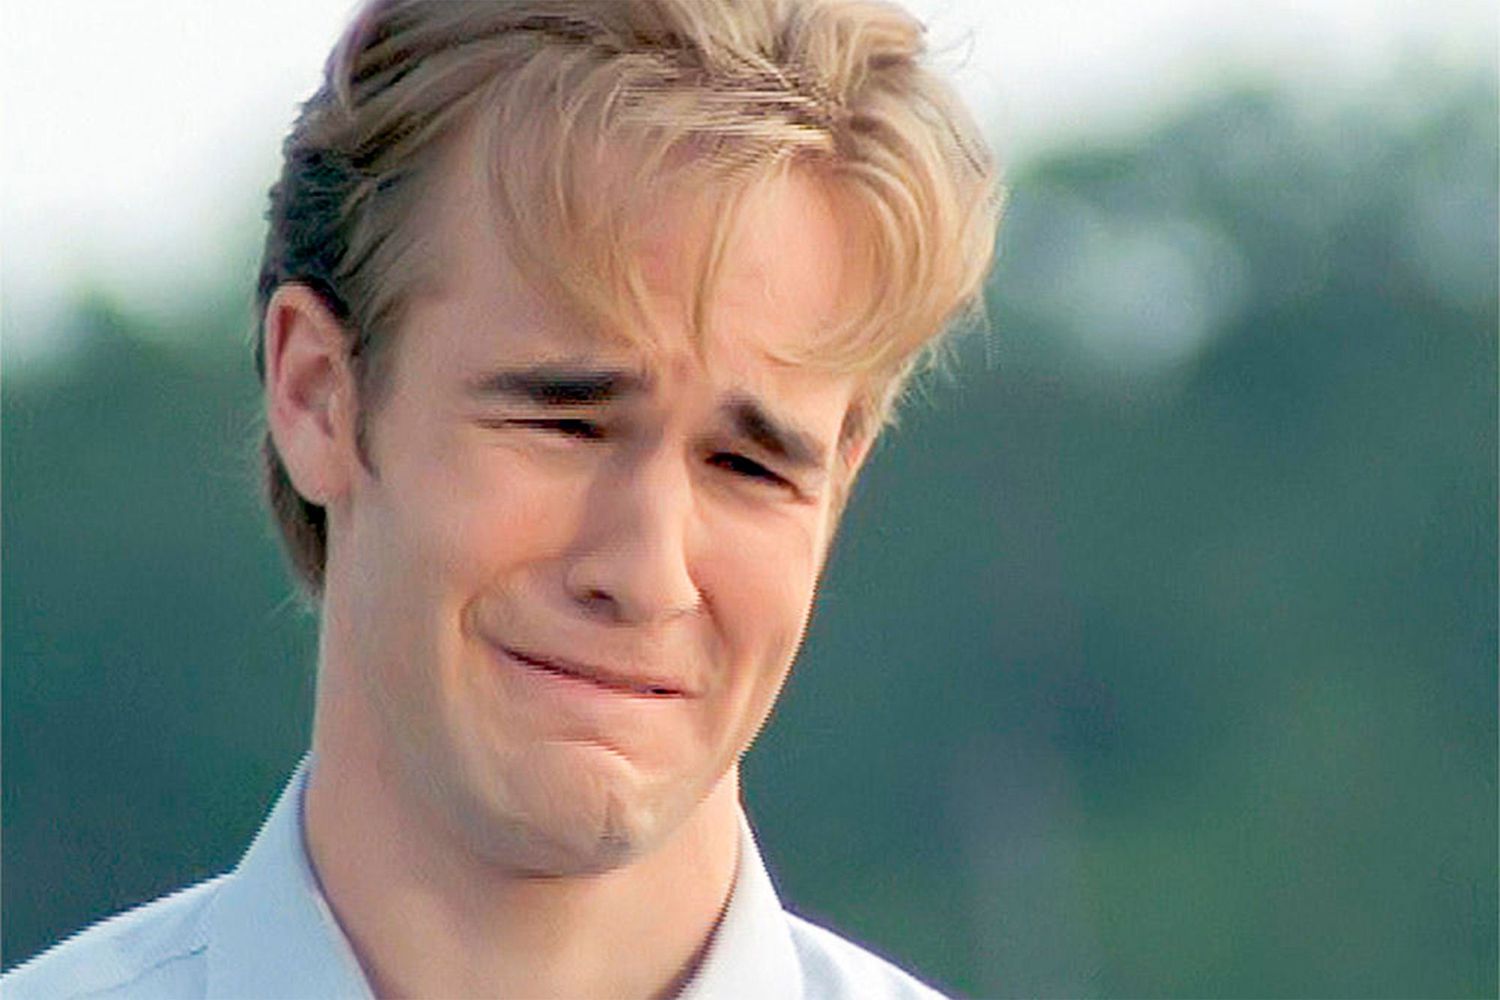 James Van Der Beek's crying face came from the season 3 finale of Daws...